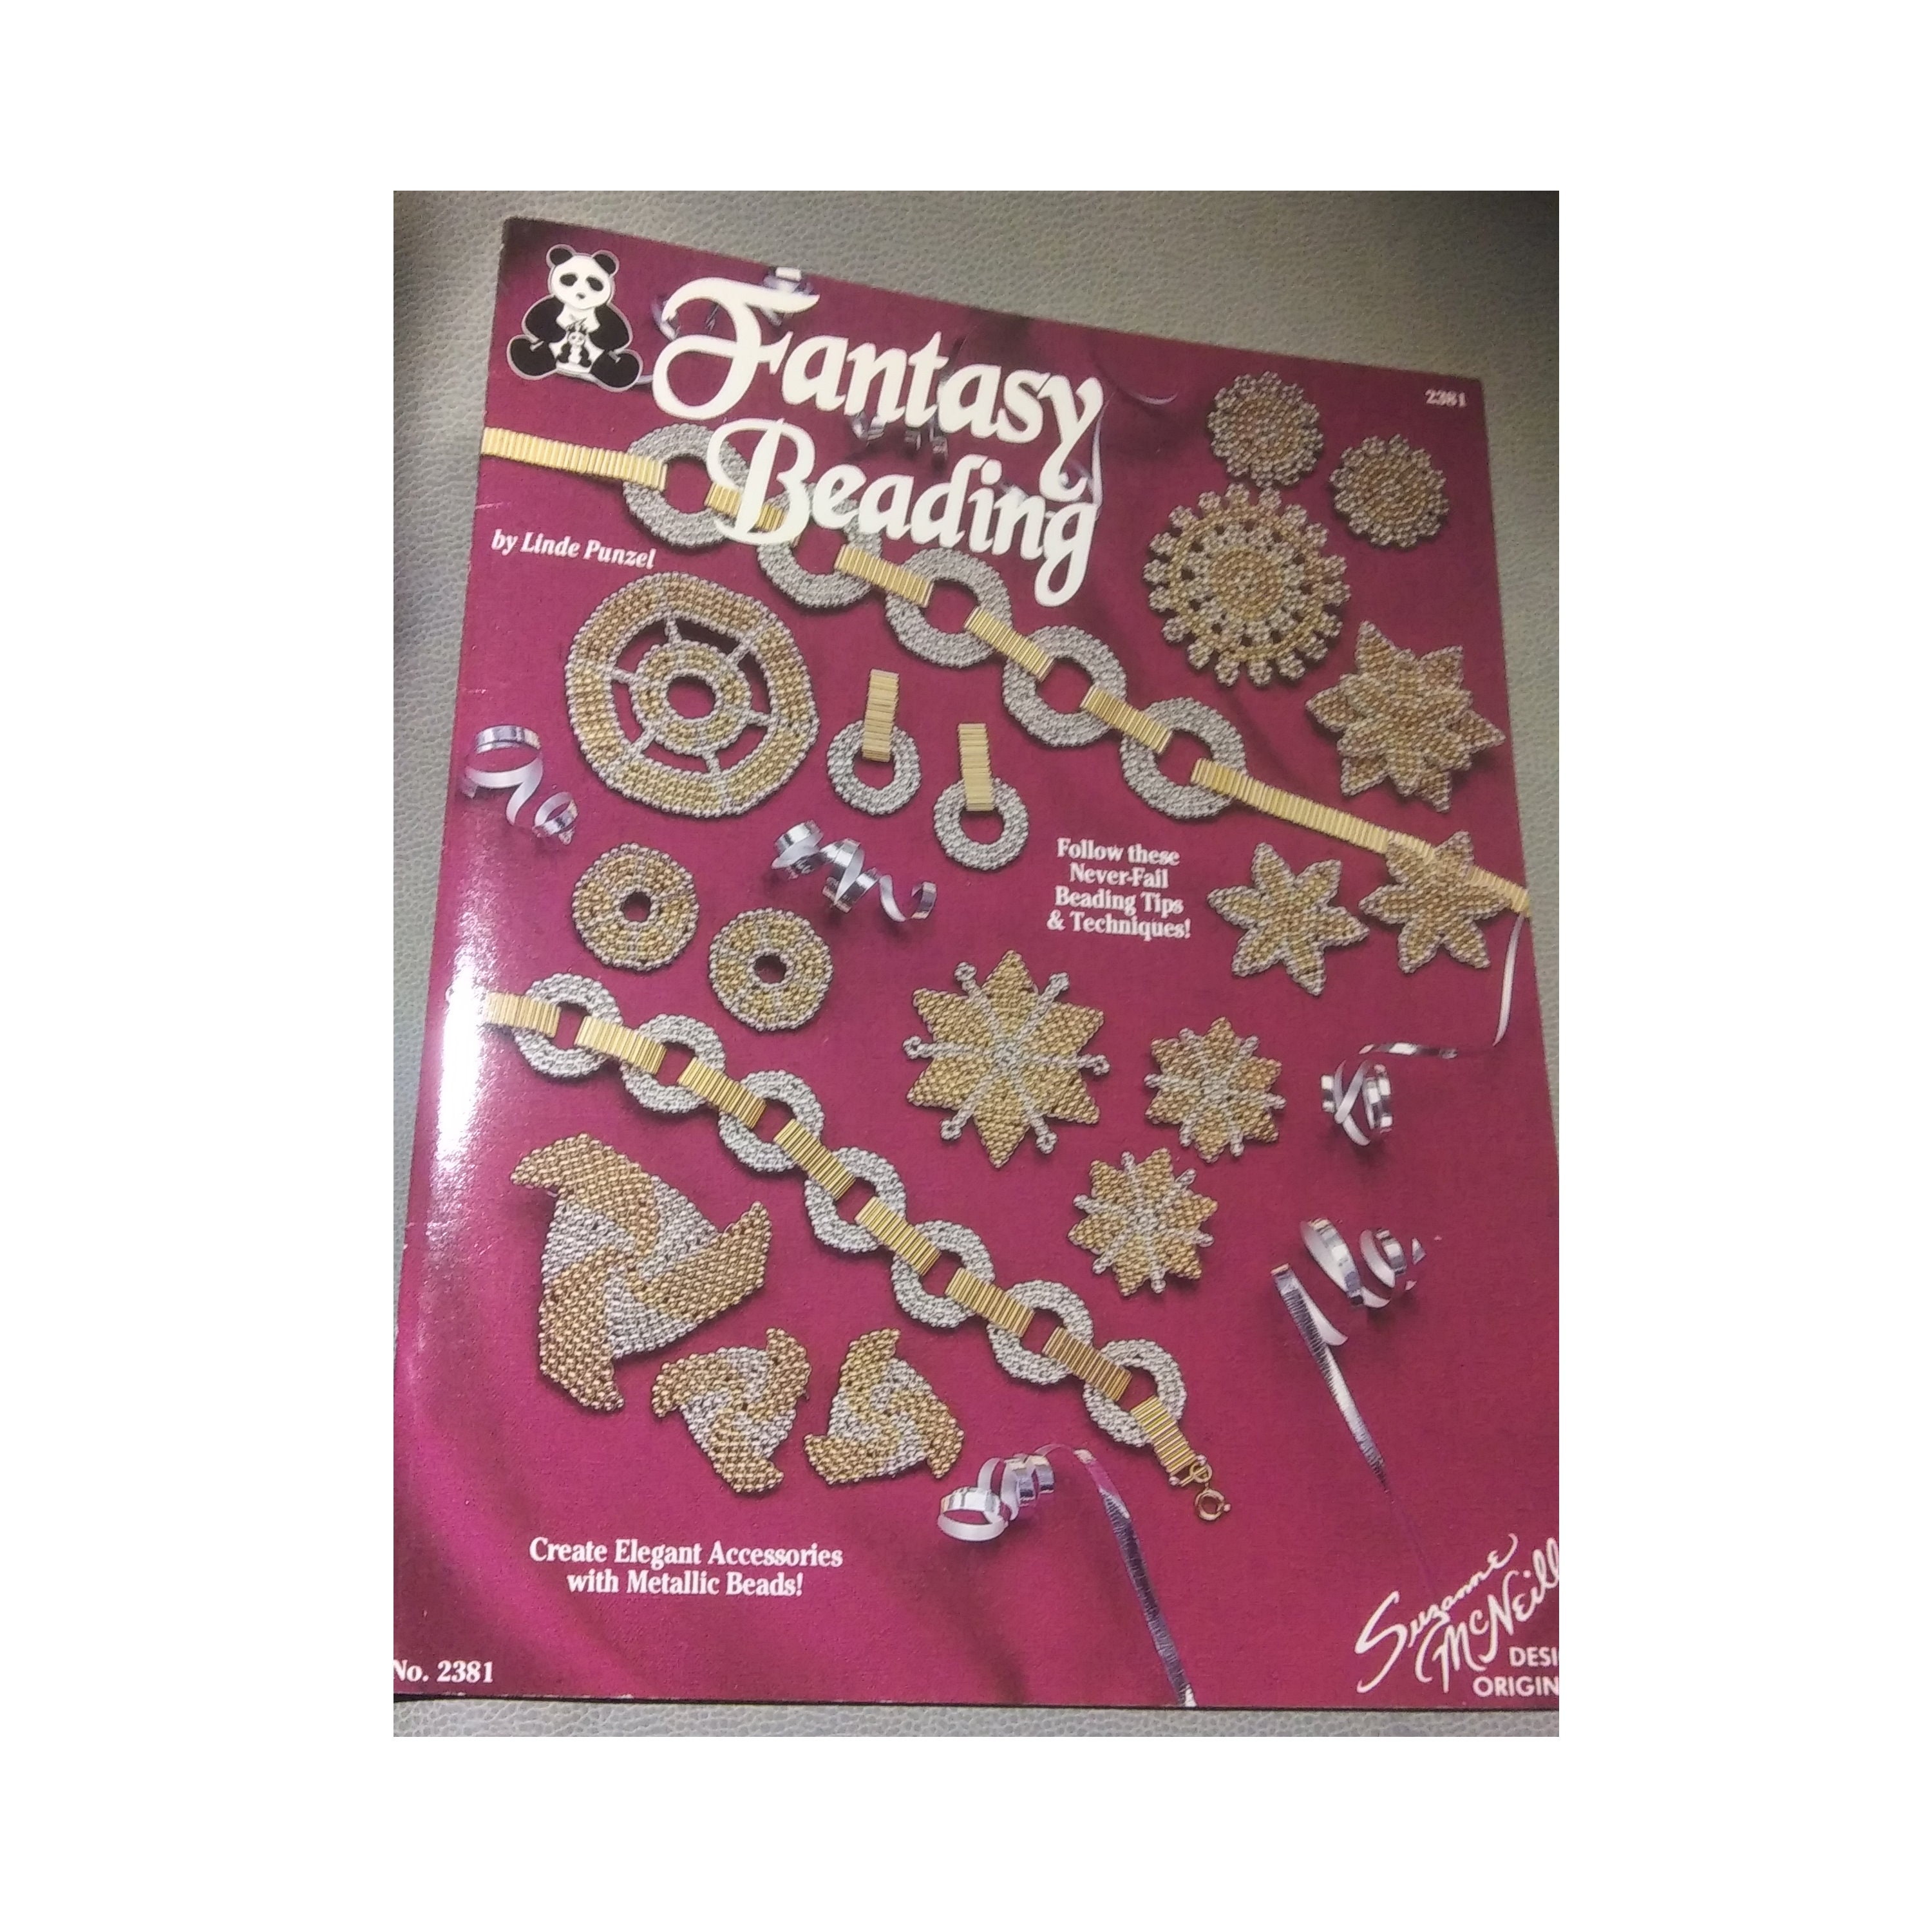 Great Designs for Shaped Beads Book by Anna Elizabeth Draeger, Beading Book,  Bead Weaving Book, Shape Beads Jewelry Jewellery 87 Pages 